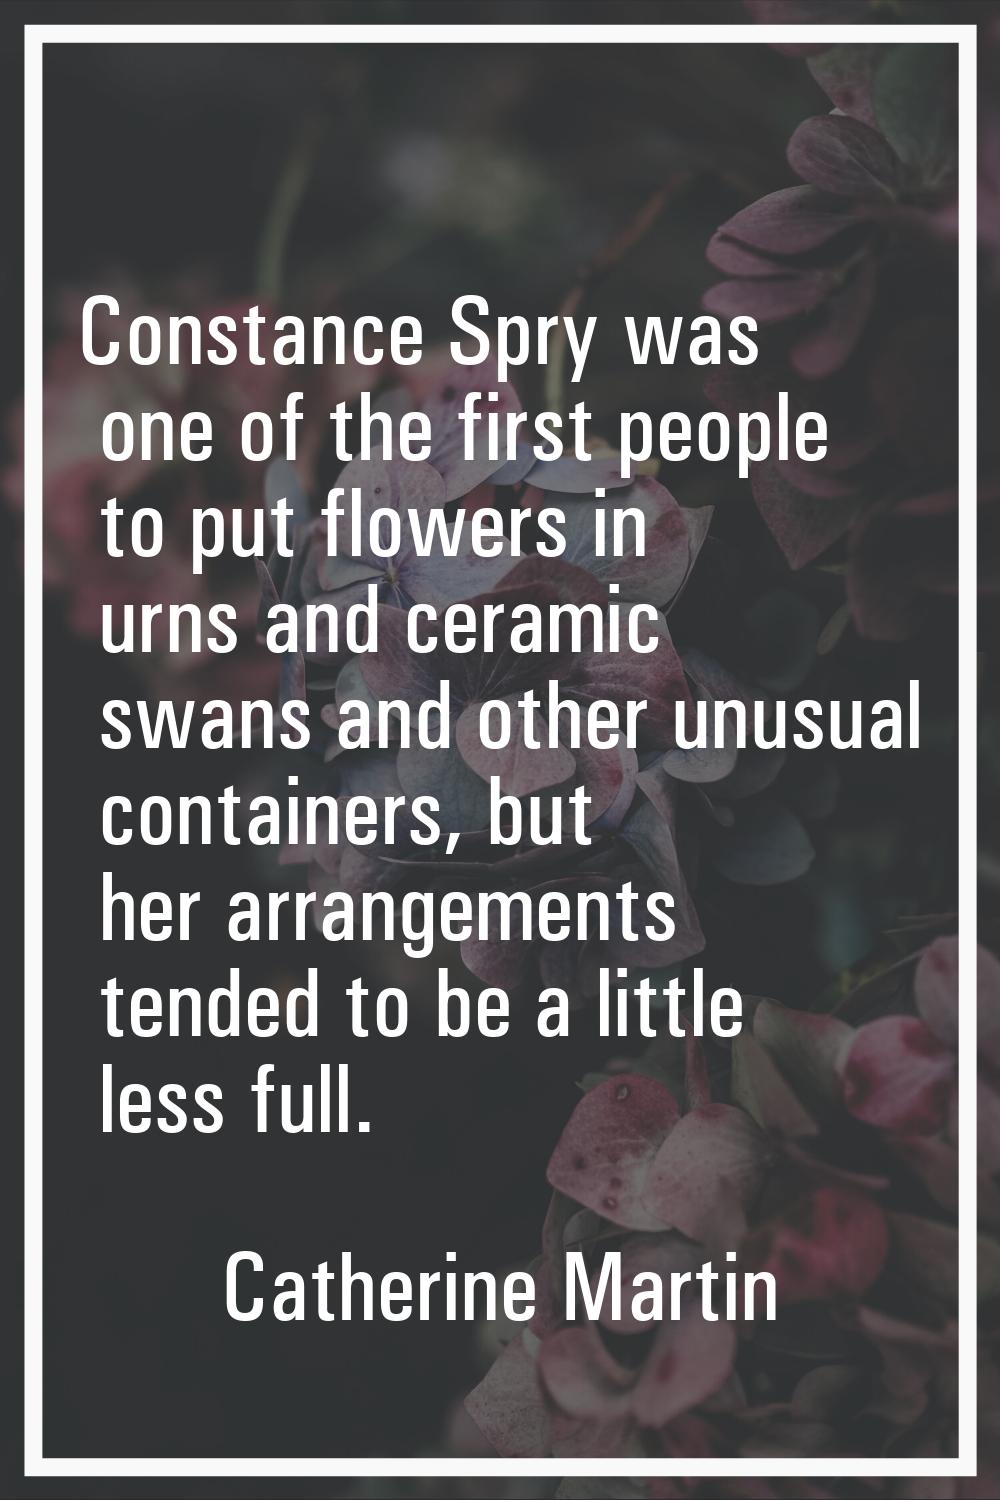 Constance Spry was one of the first people to put flowers in urns and ceramic swans and other unusu